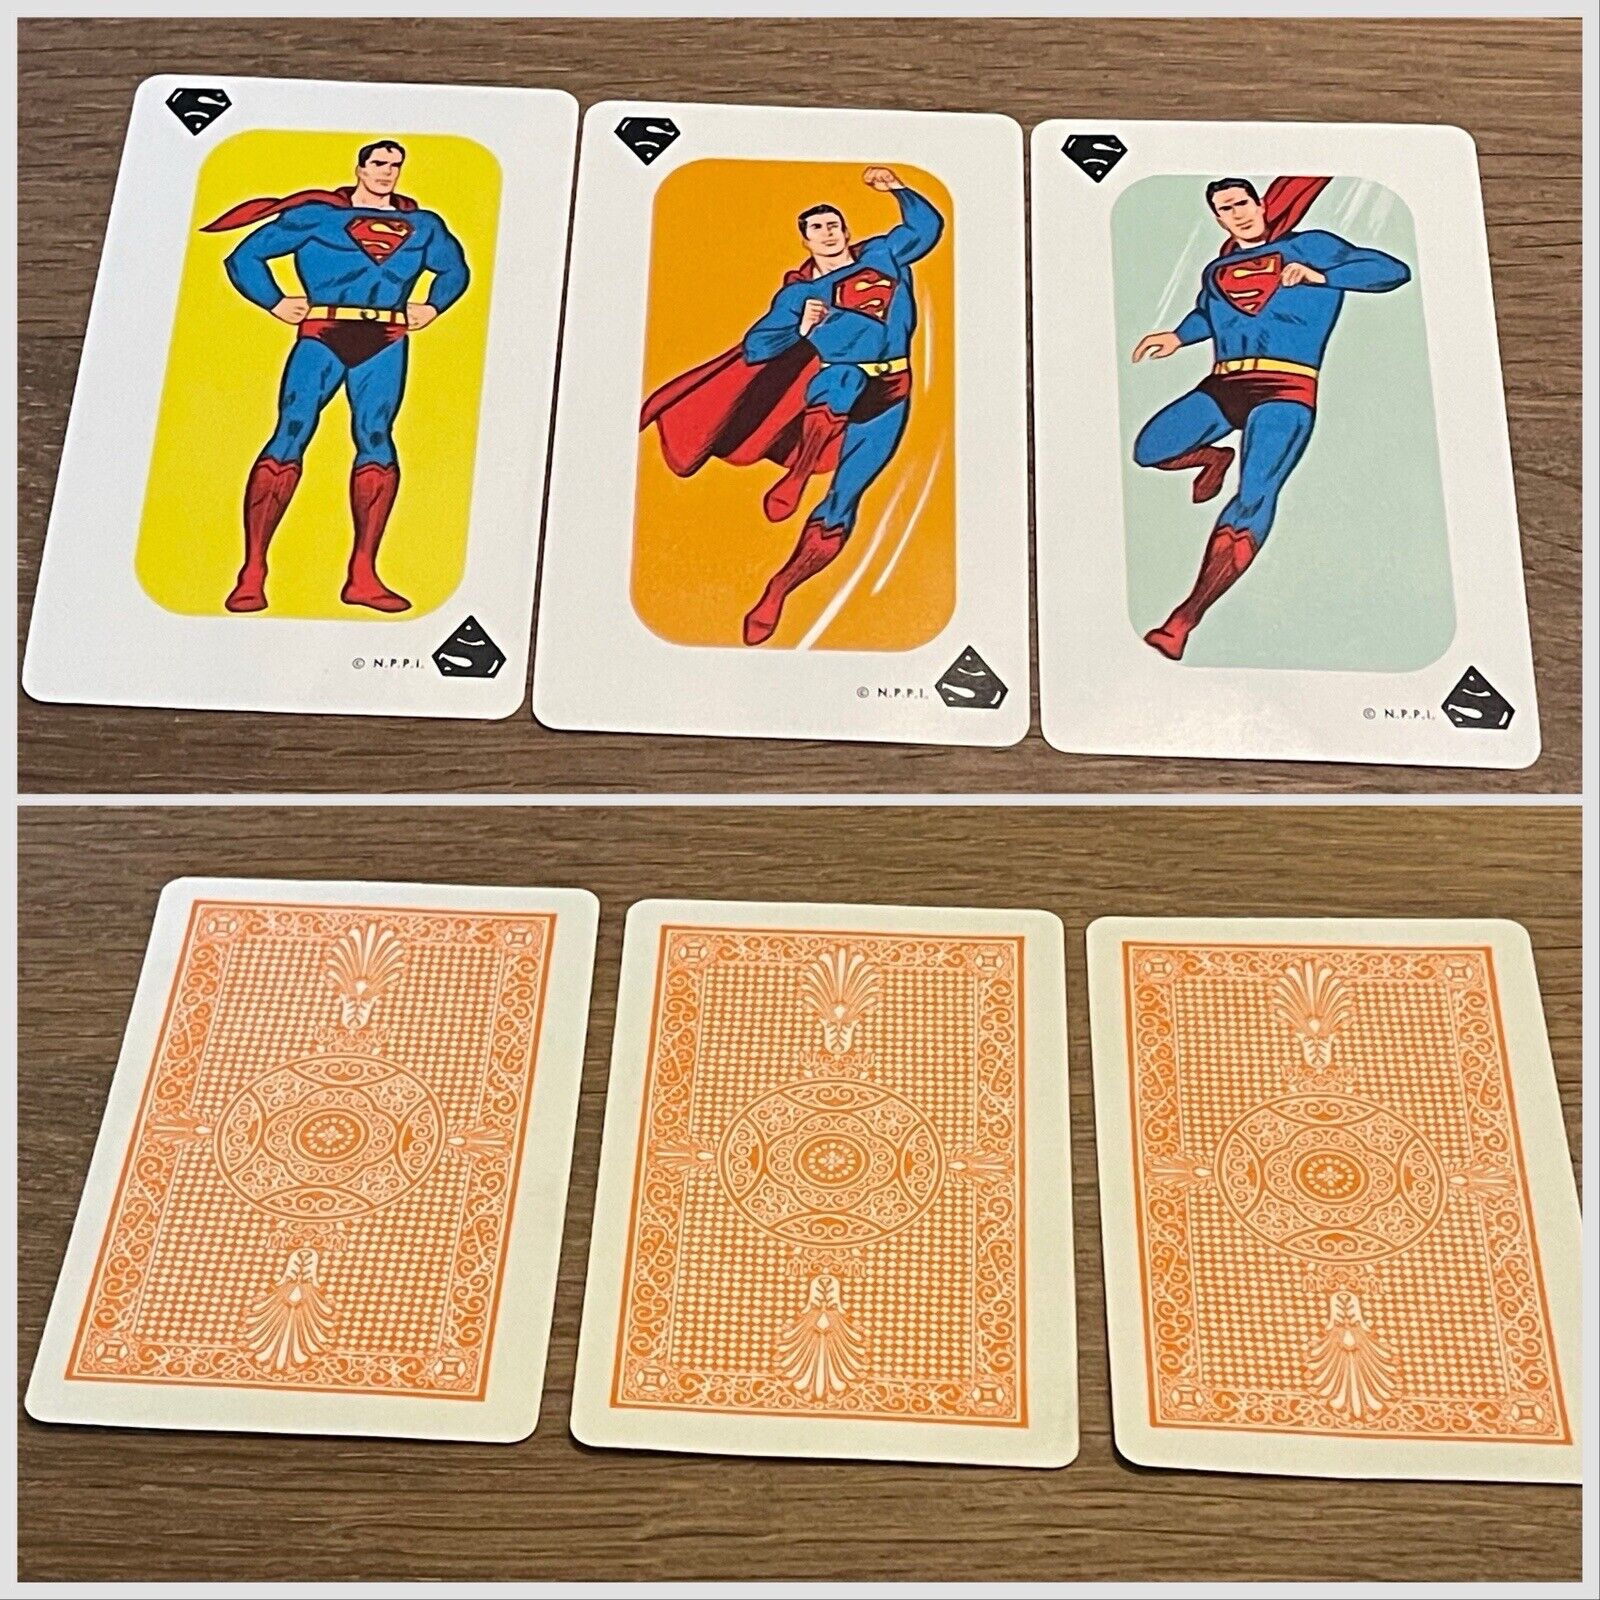 EXTREMELY RARE VINTAGE 1966 WHITMAN SUPERMAN CARD GAME PLAYING CARDS N.P.P.I